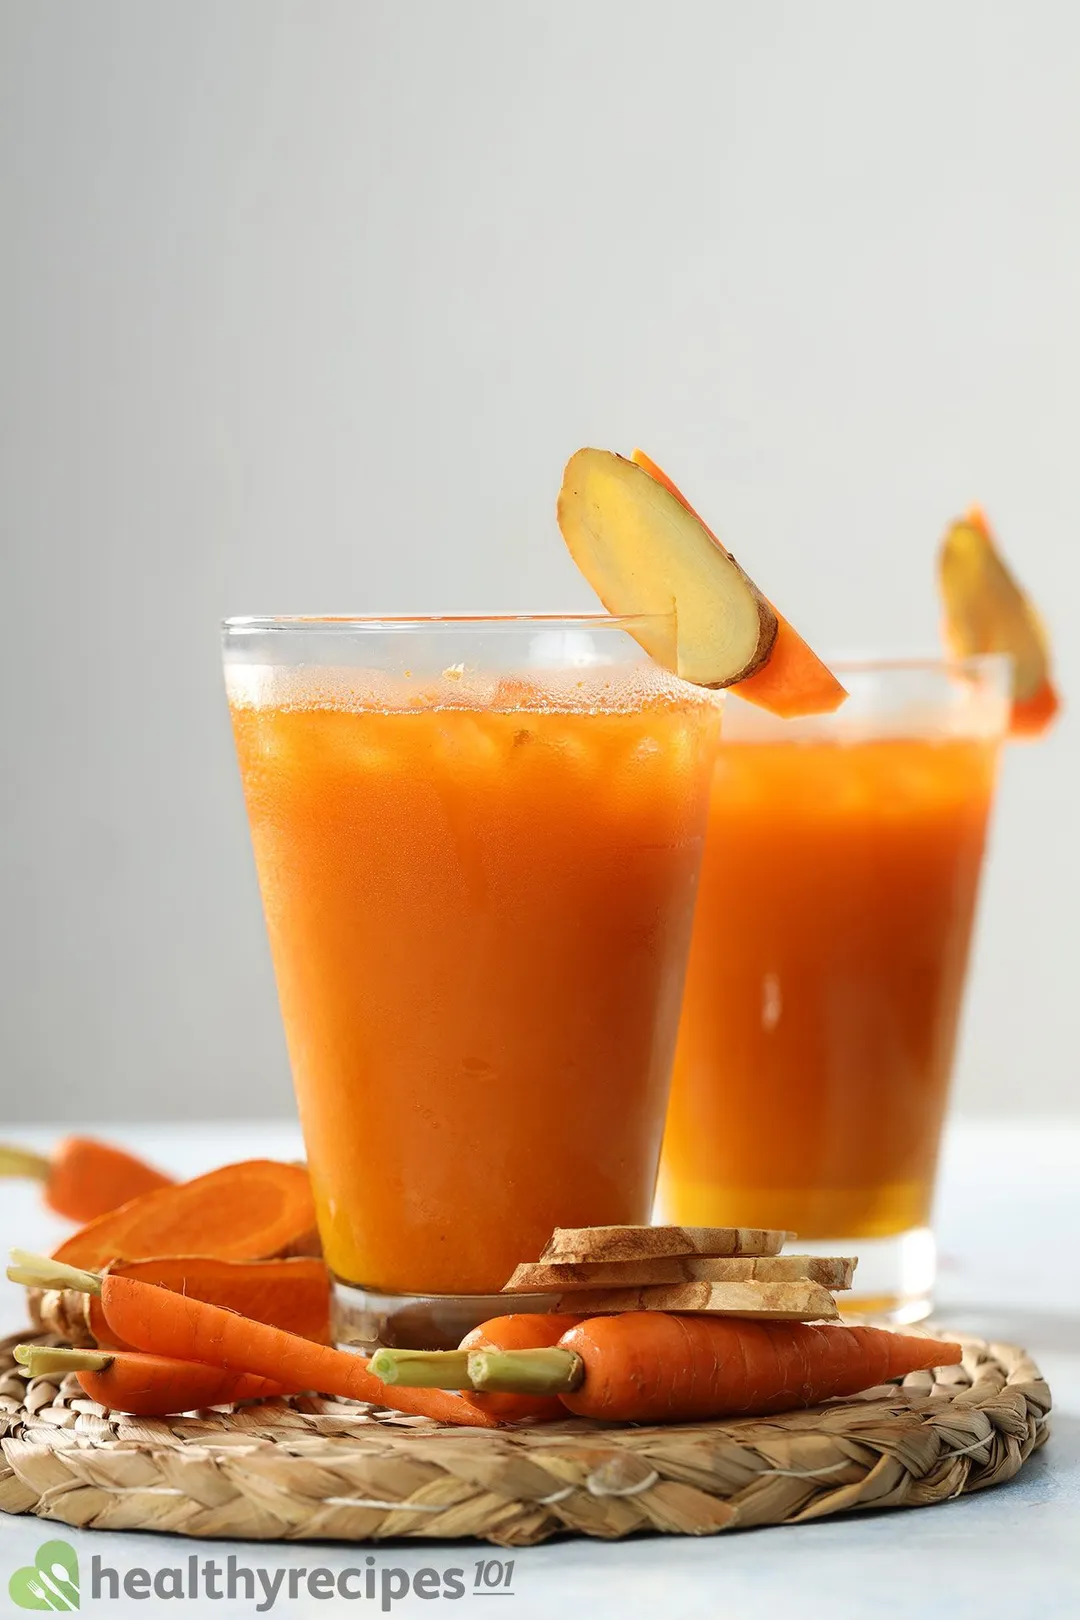 Two glasses of Carrot Ginger Turmeric Juice placed near baby carrots and ginger slices.